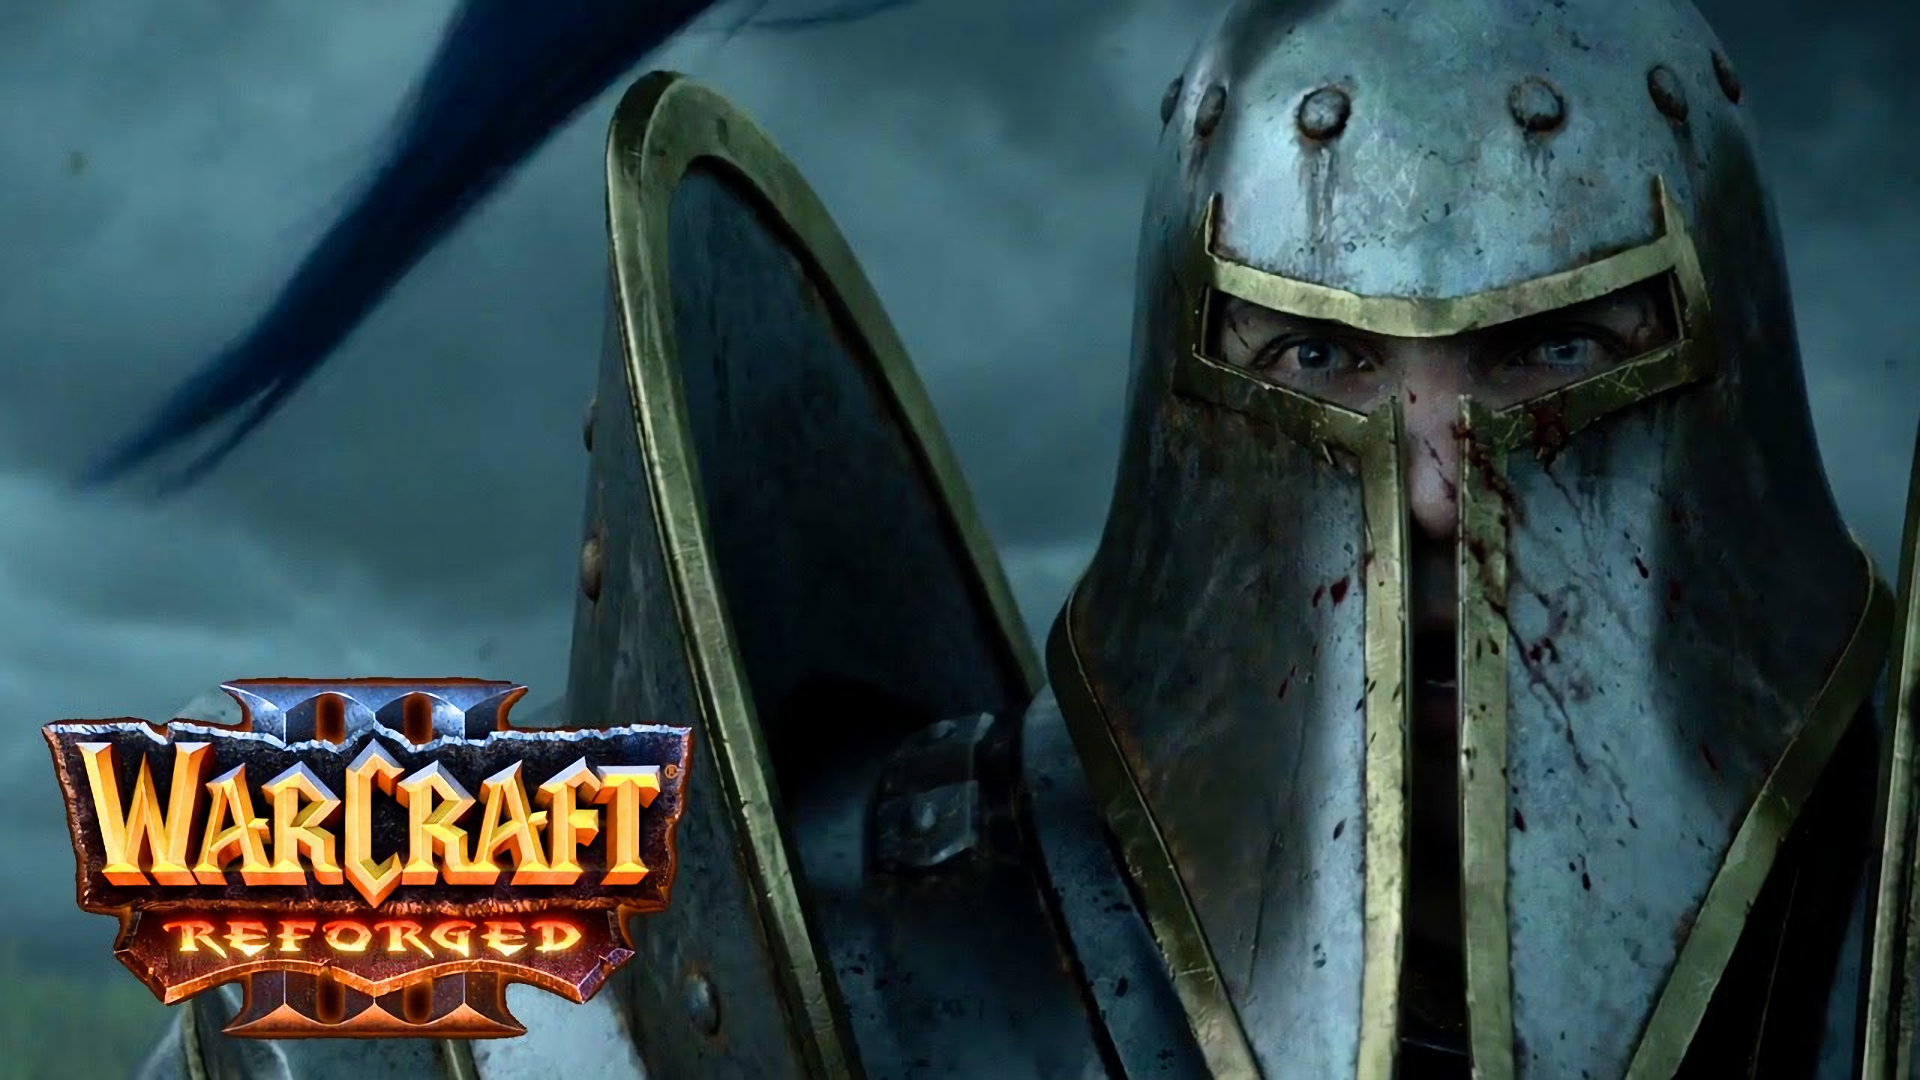 Warcraft Iii Reforged Hd Wallpaper Heroic Armor Close Up